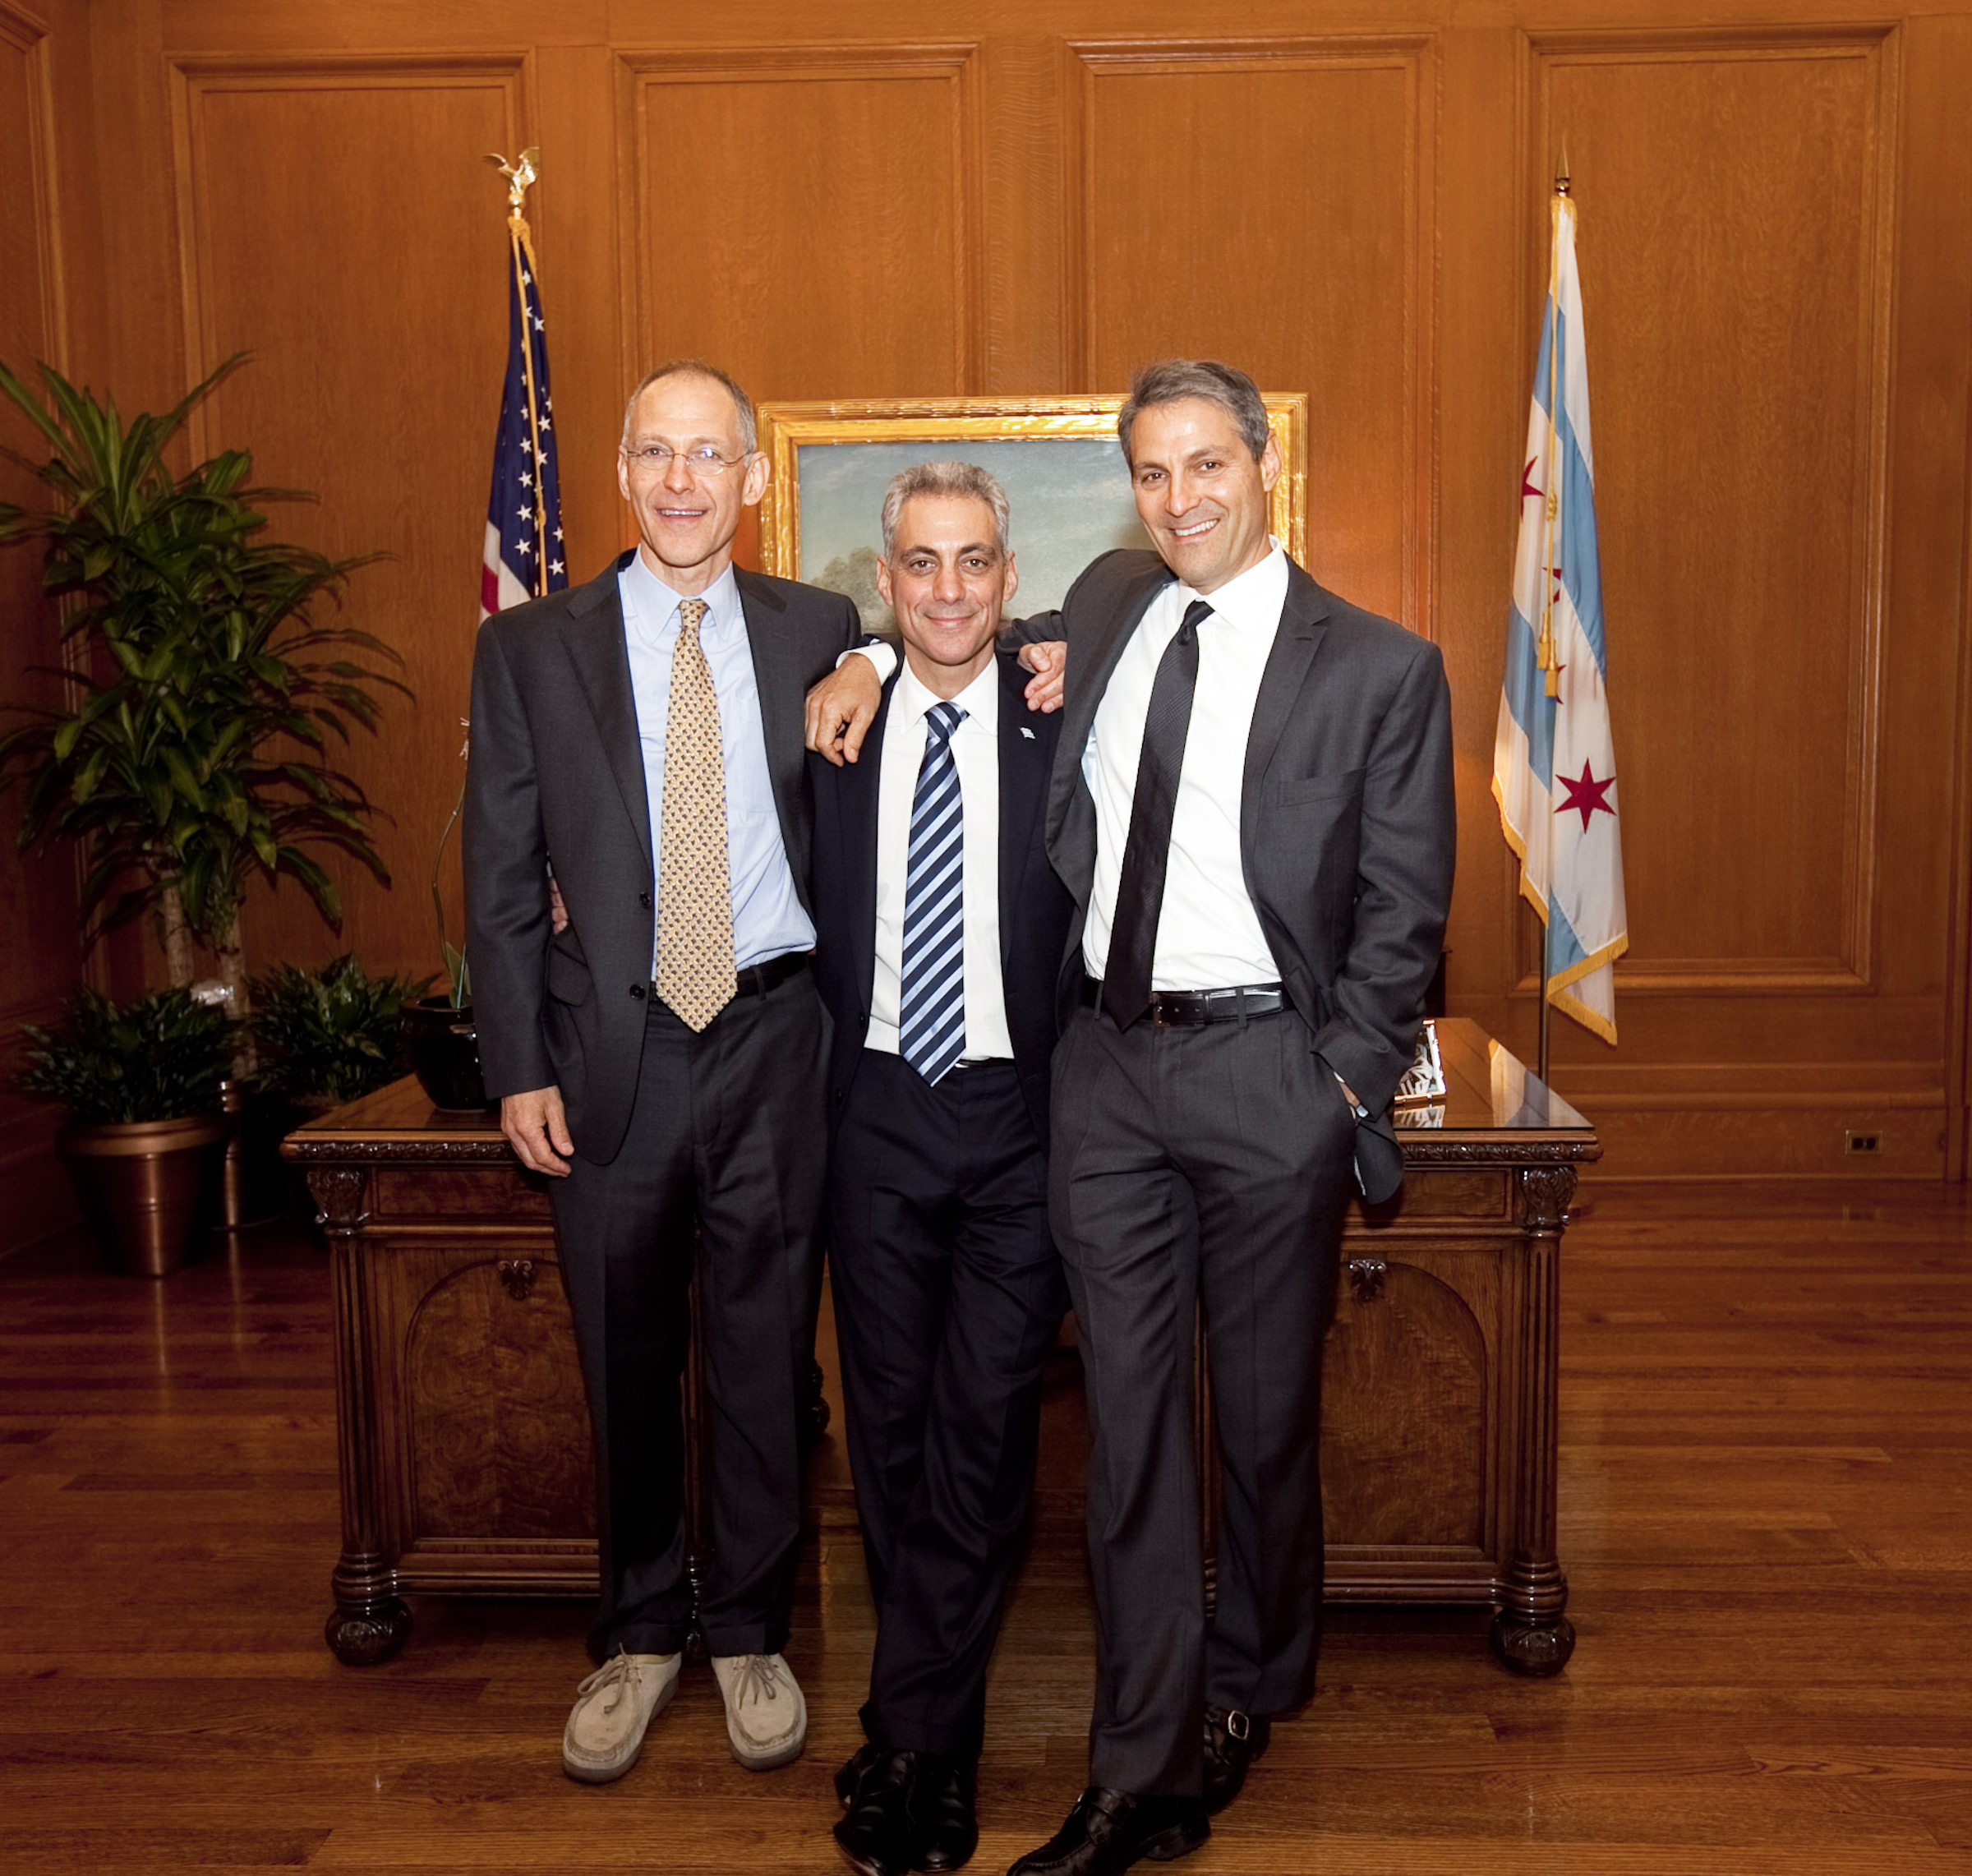 Today, Zeke Emanuel is the University of Pennsylvania vice provost of global initiatives, Rahm is the mayor of Chicago and Ari created Hollywood talent agency William Morris Endeavor